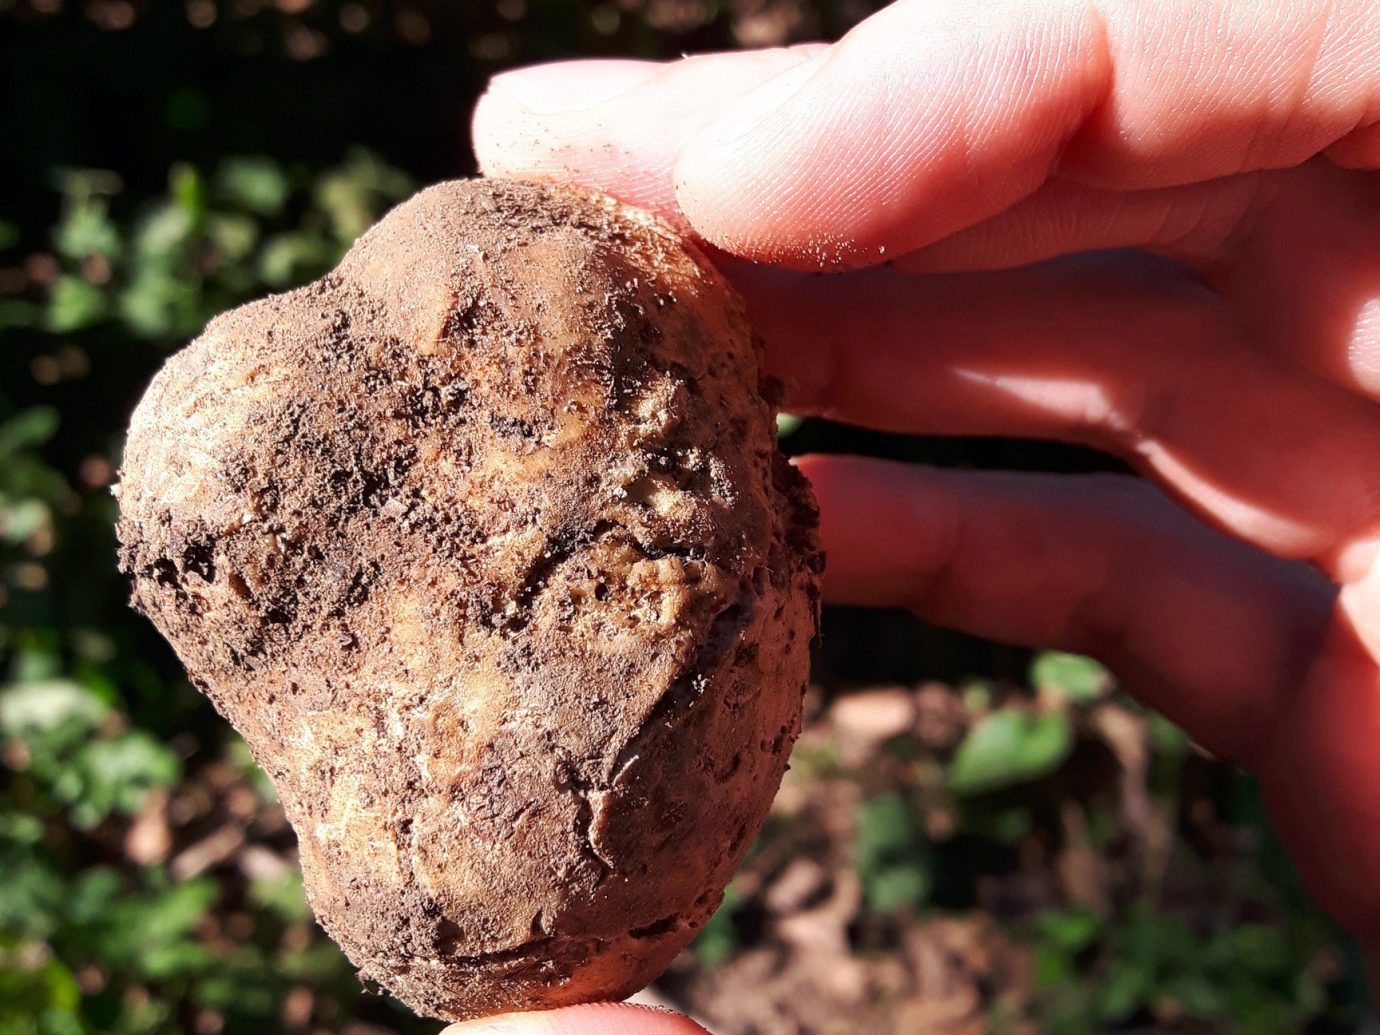 White truffle from Piedmont Italy